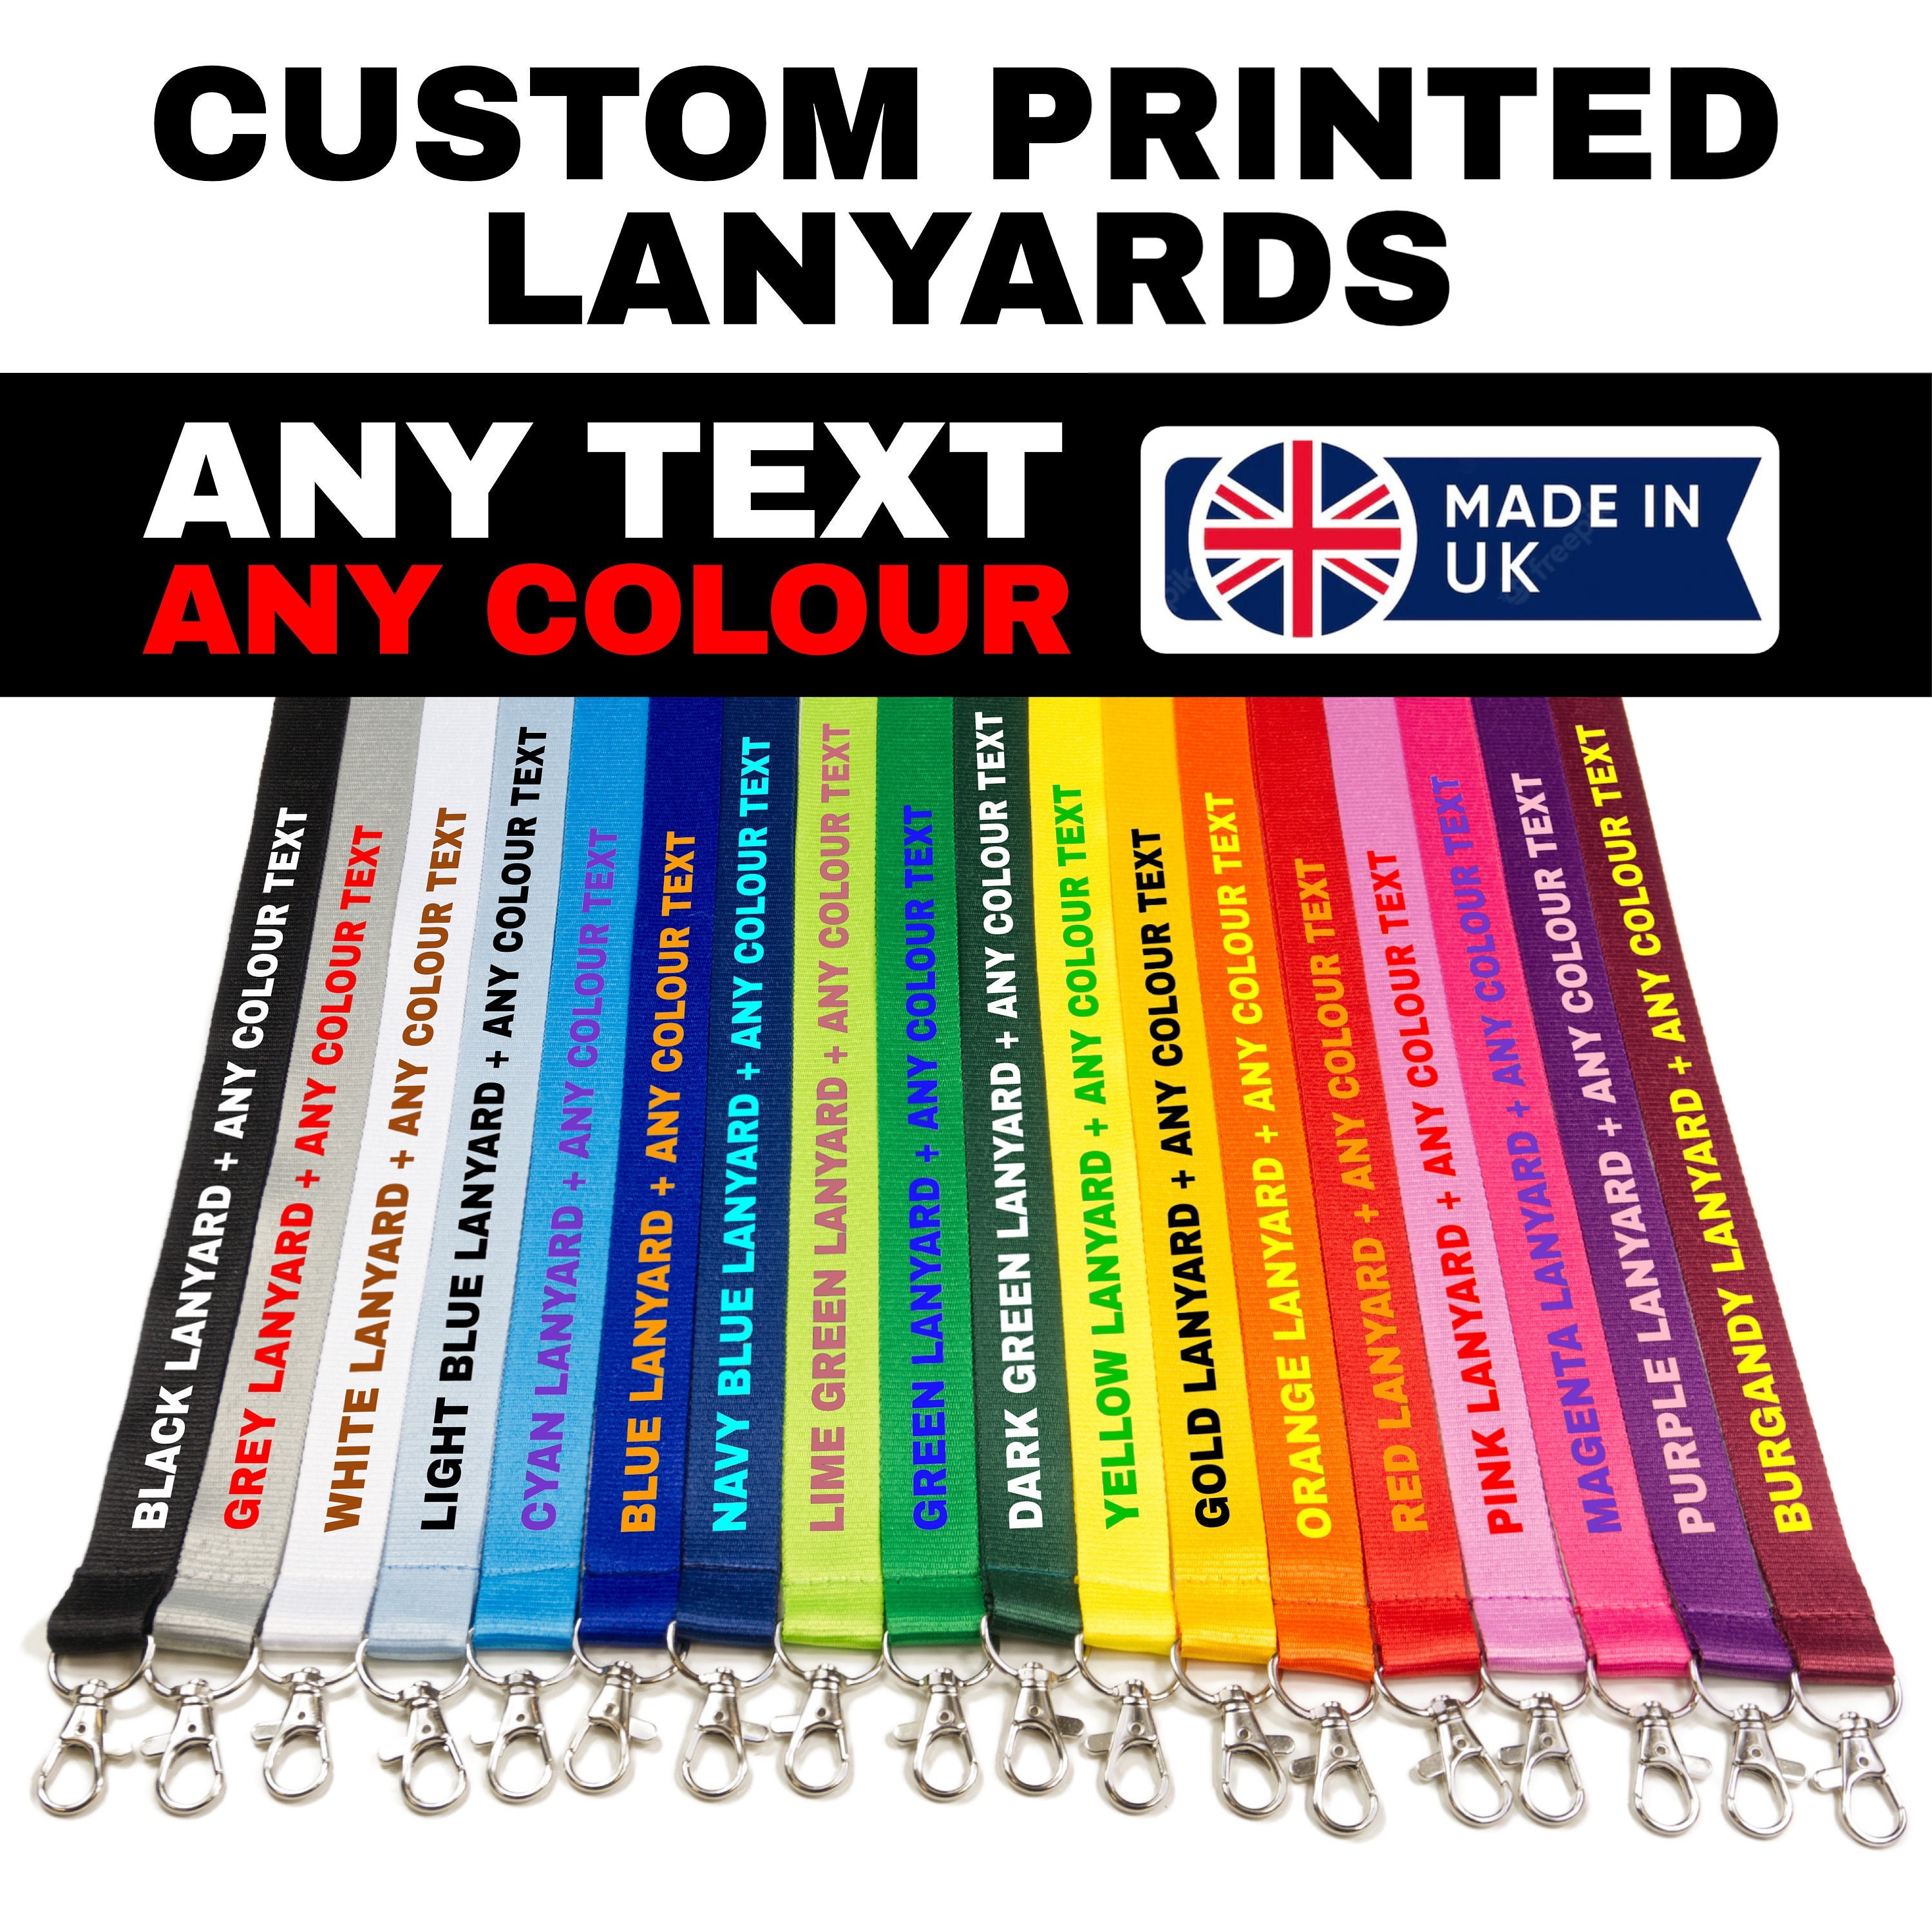 Buttonsmith Custom Logo on Silver Lanyard - Pack of 10 - Upload Your Logo,  Full Color Logo on Dye Sublimation Lanyard - Made in The USA